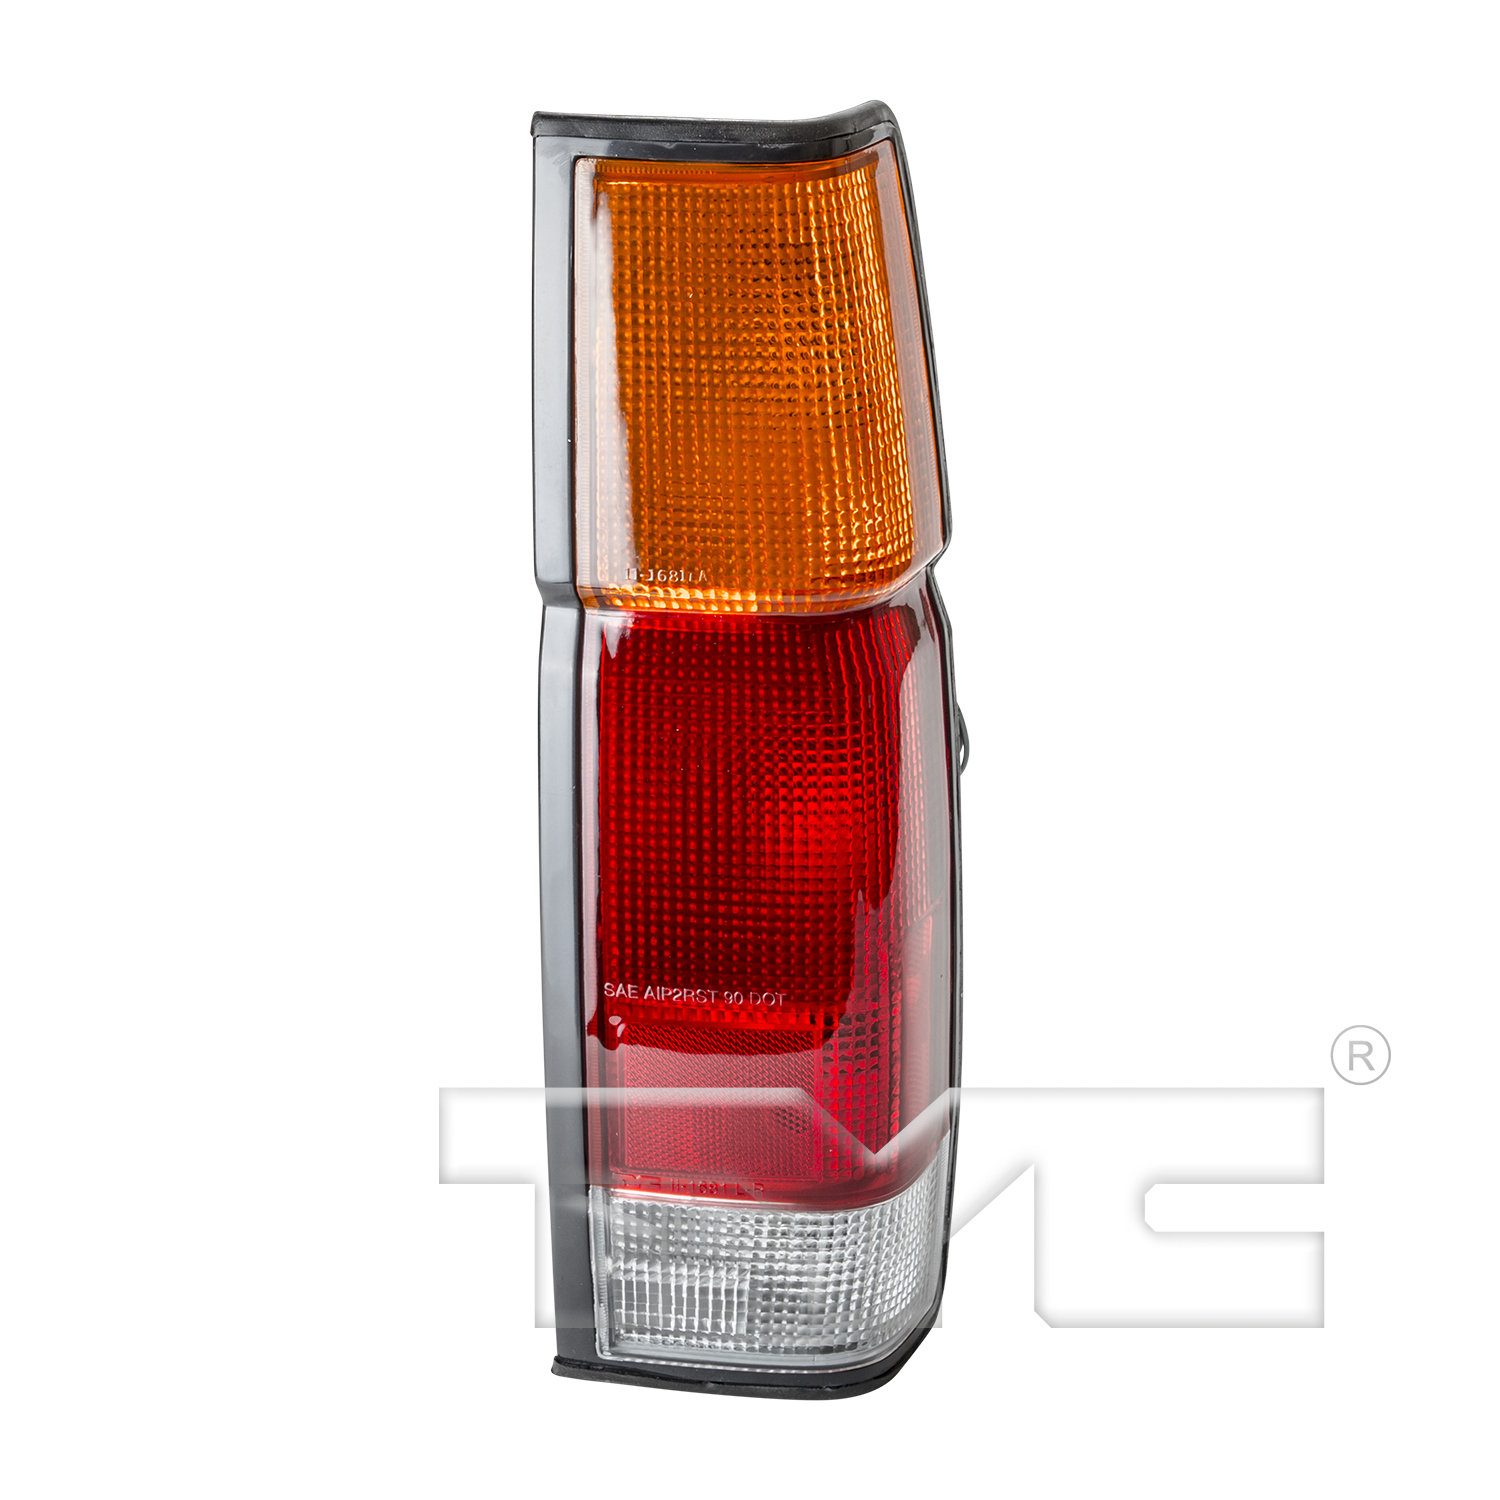 Aftermarket TAILLIGHTS for NISSAN - D21, D21,86-94,RT Taillamp assy